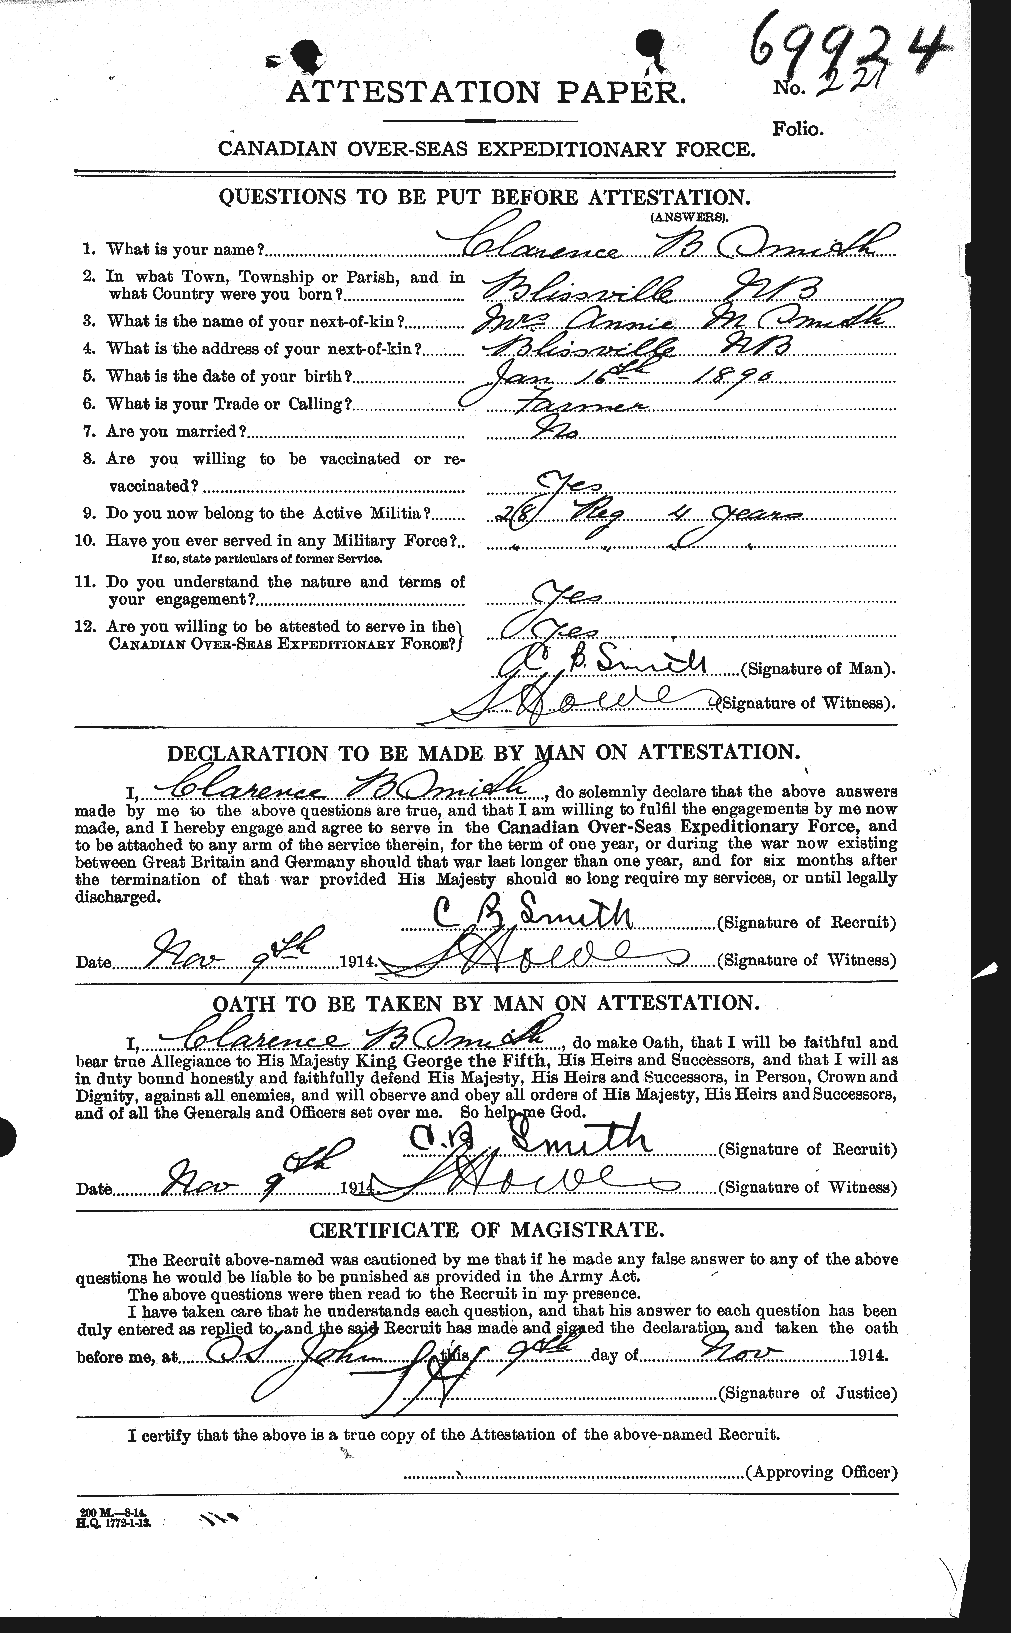 Personnel Records of the First World War - CEF 104013a